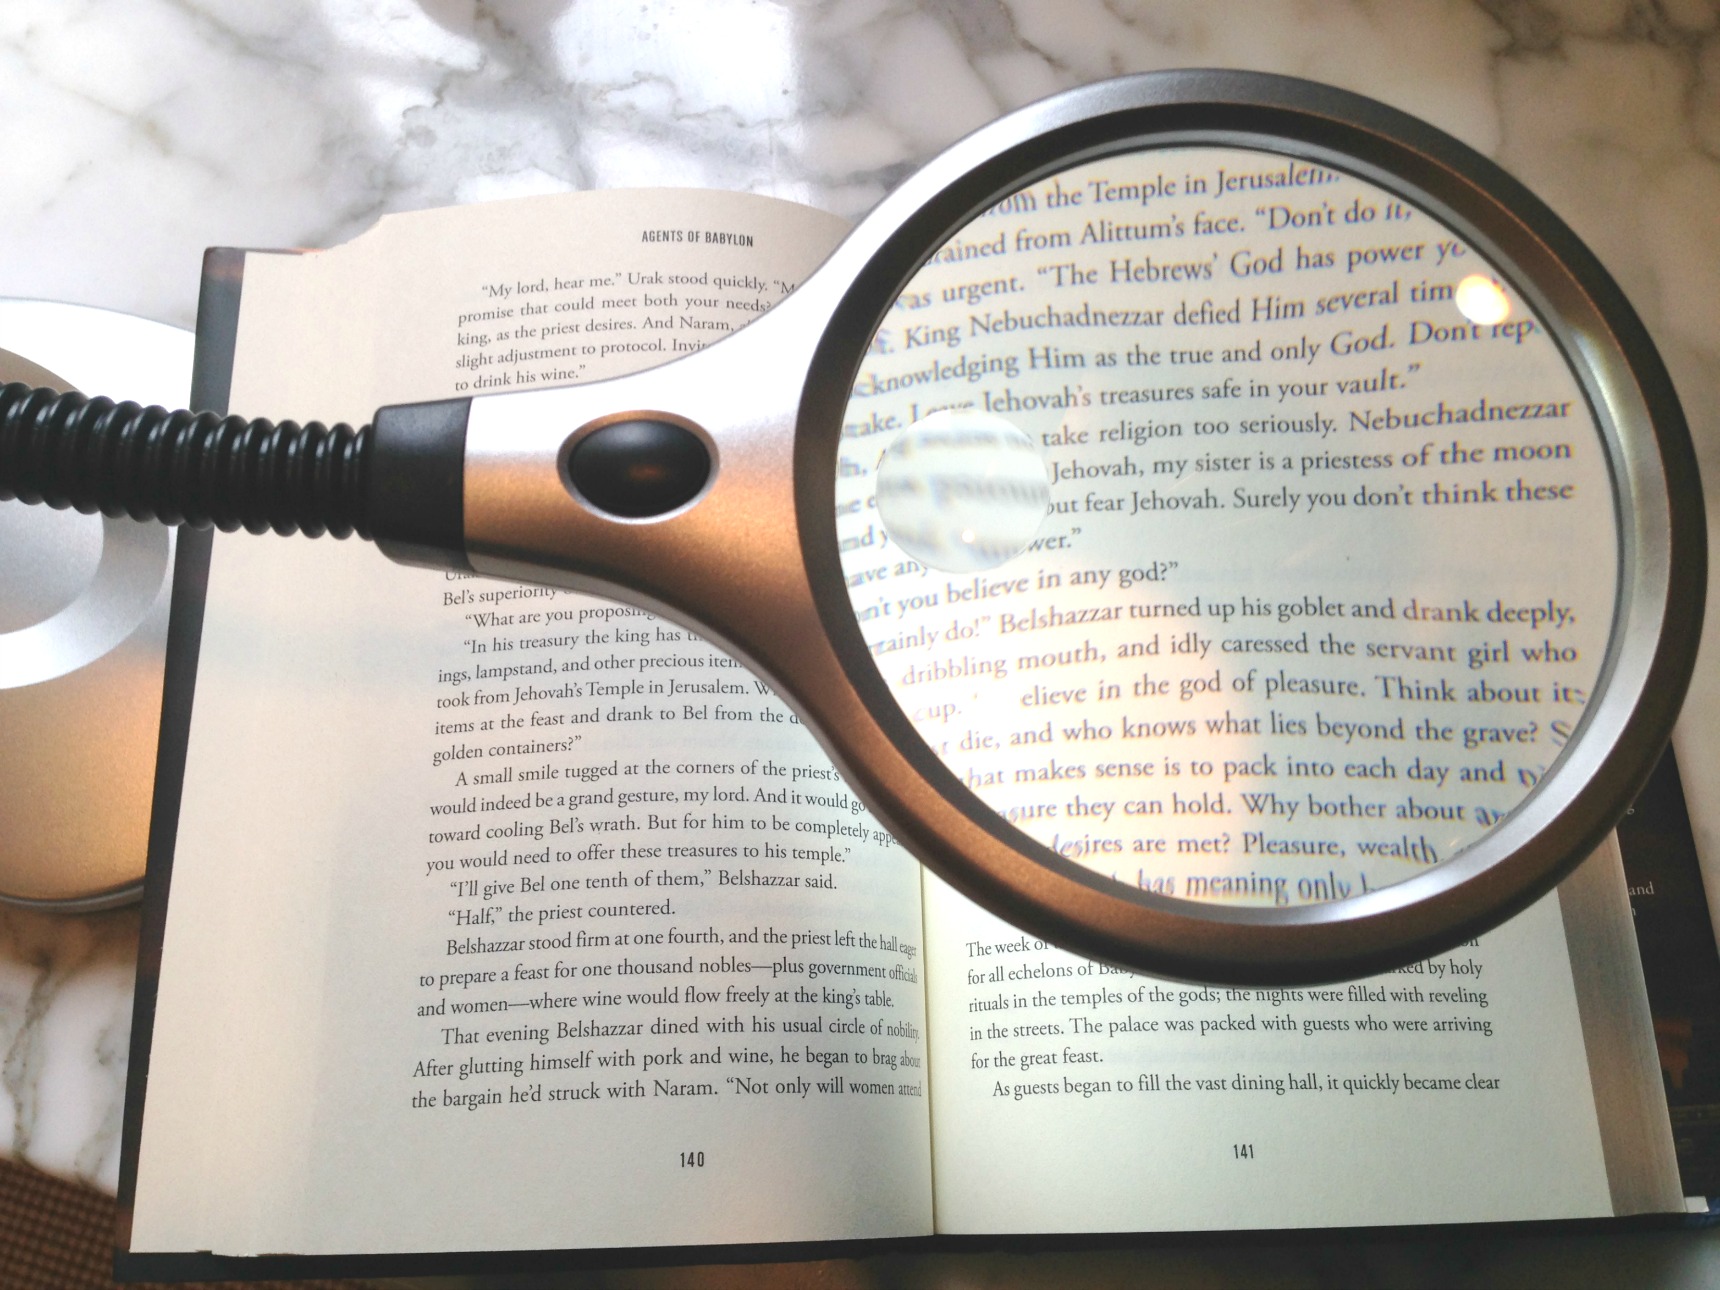 Choosing A Large Magnifying Glass